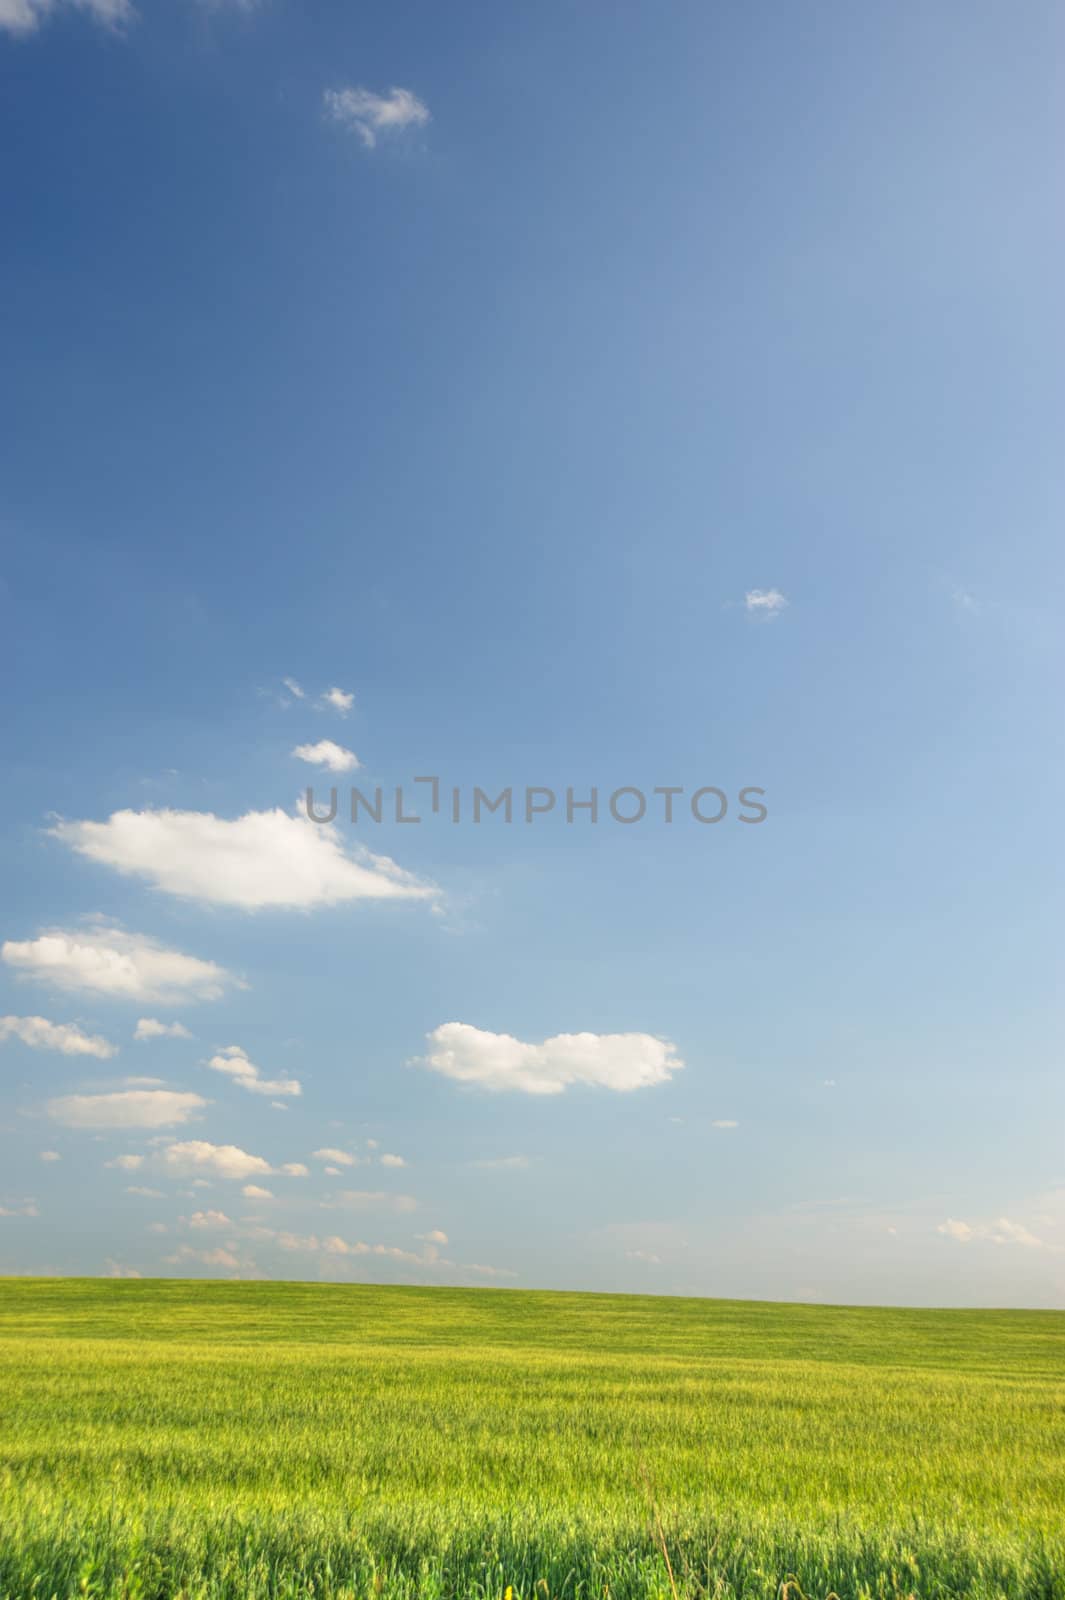 Green field and the dark blue sky. A rural landscape